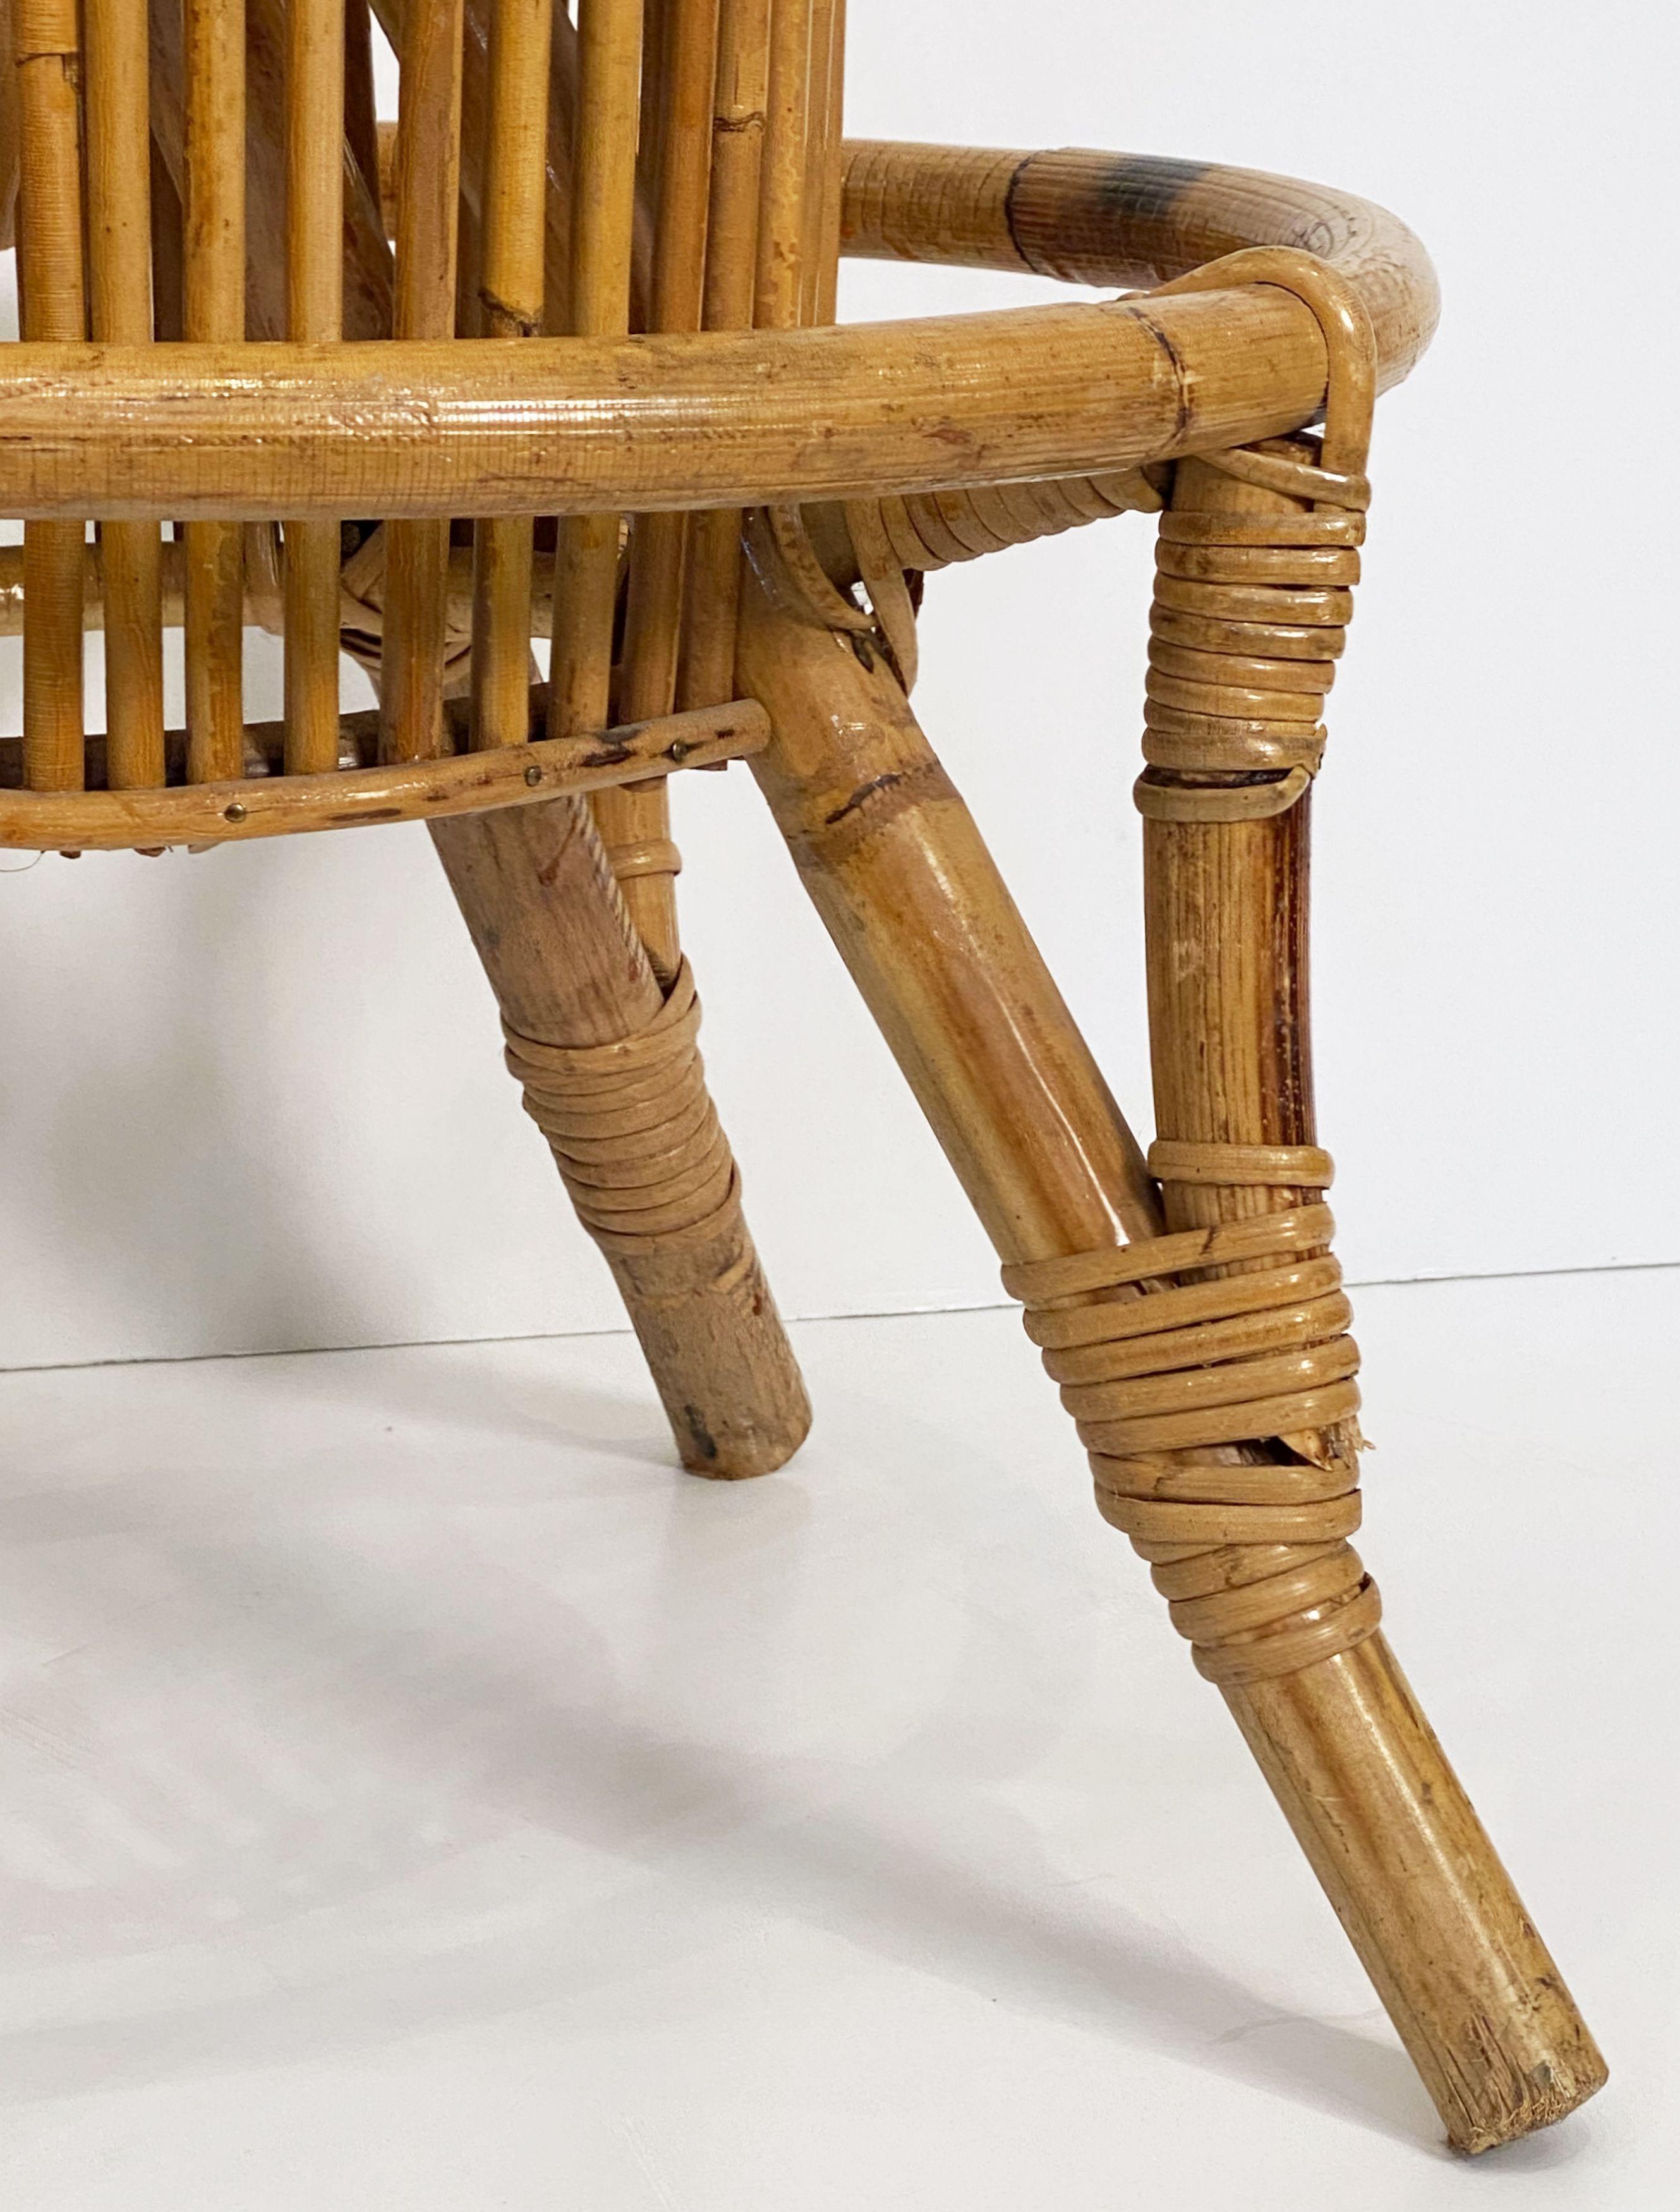 Italian Stool of Rattan and Bamboo from the Mid-20th Century For Sale 6